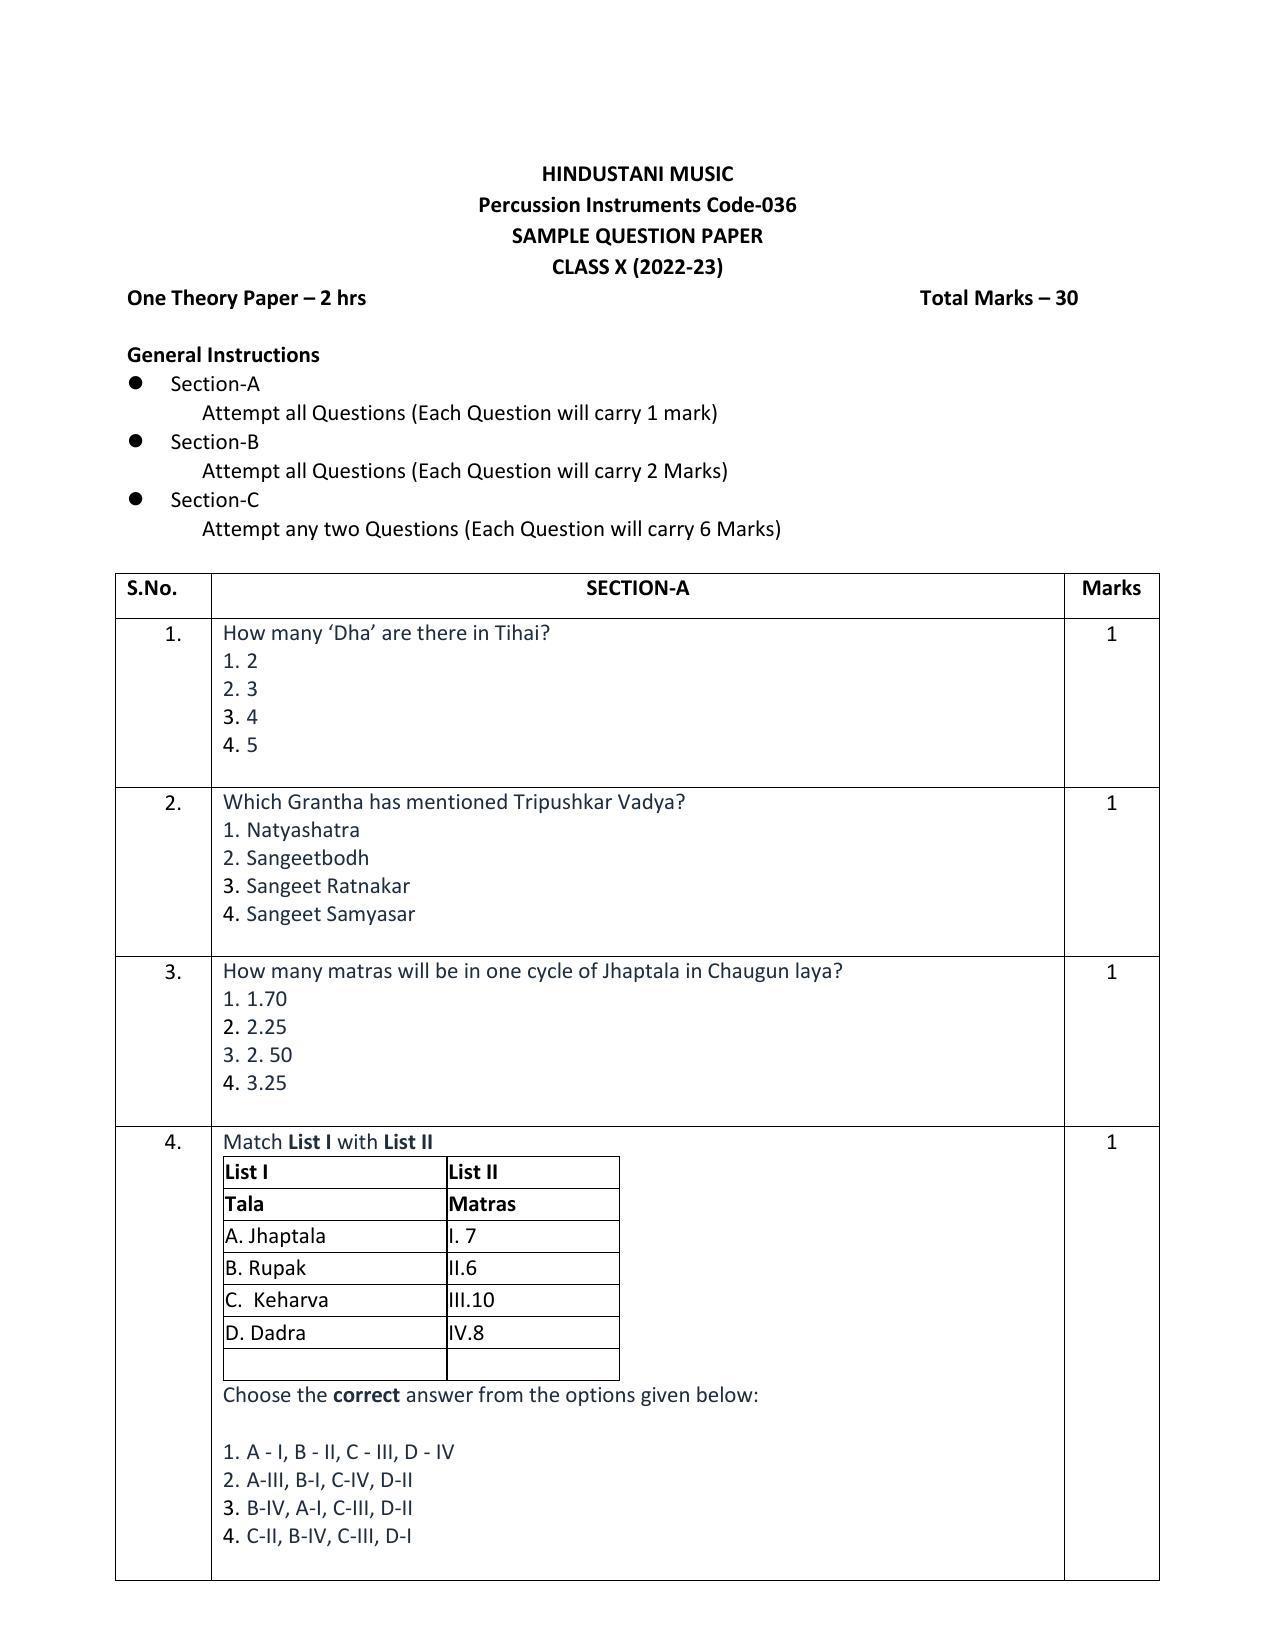 CBSE Class 10 Hindustani Music (Percussion) Sample Papers 2023 - Page 1